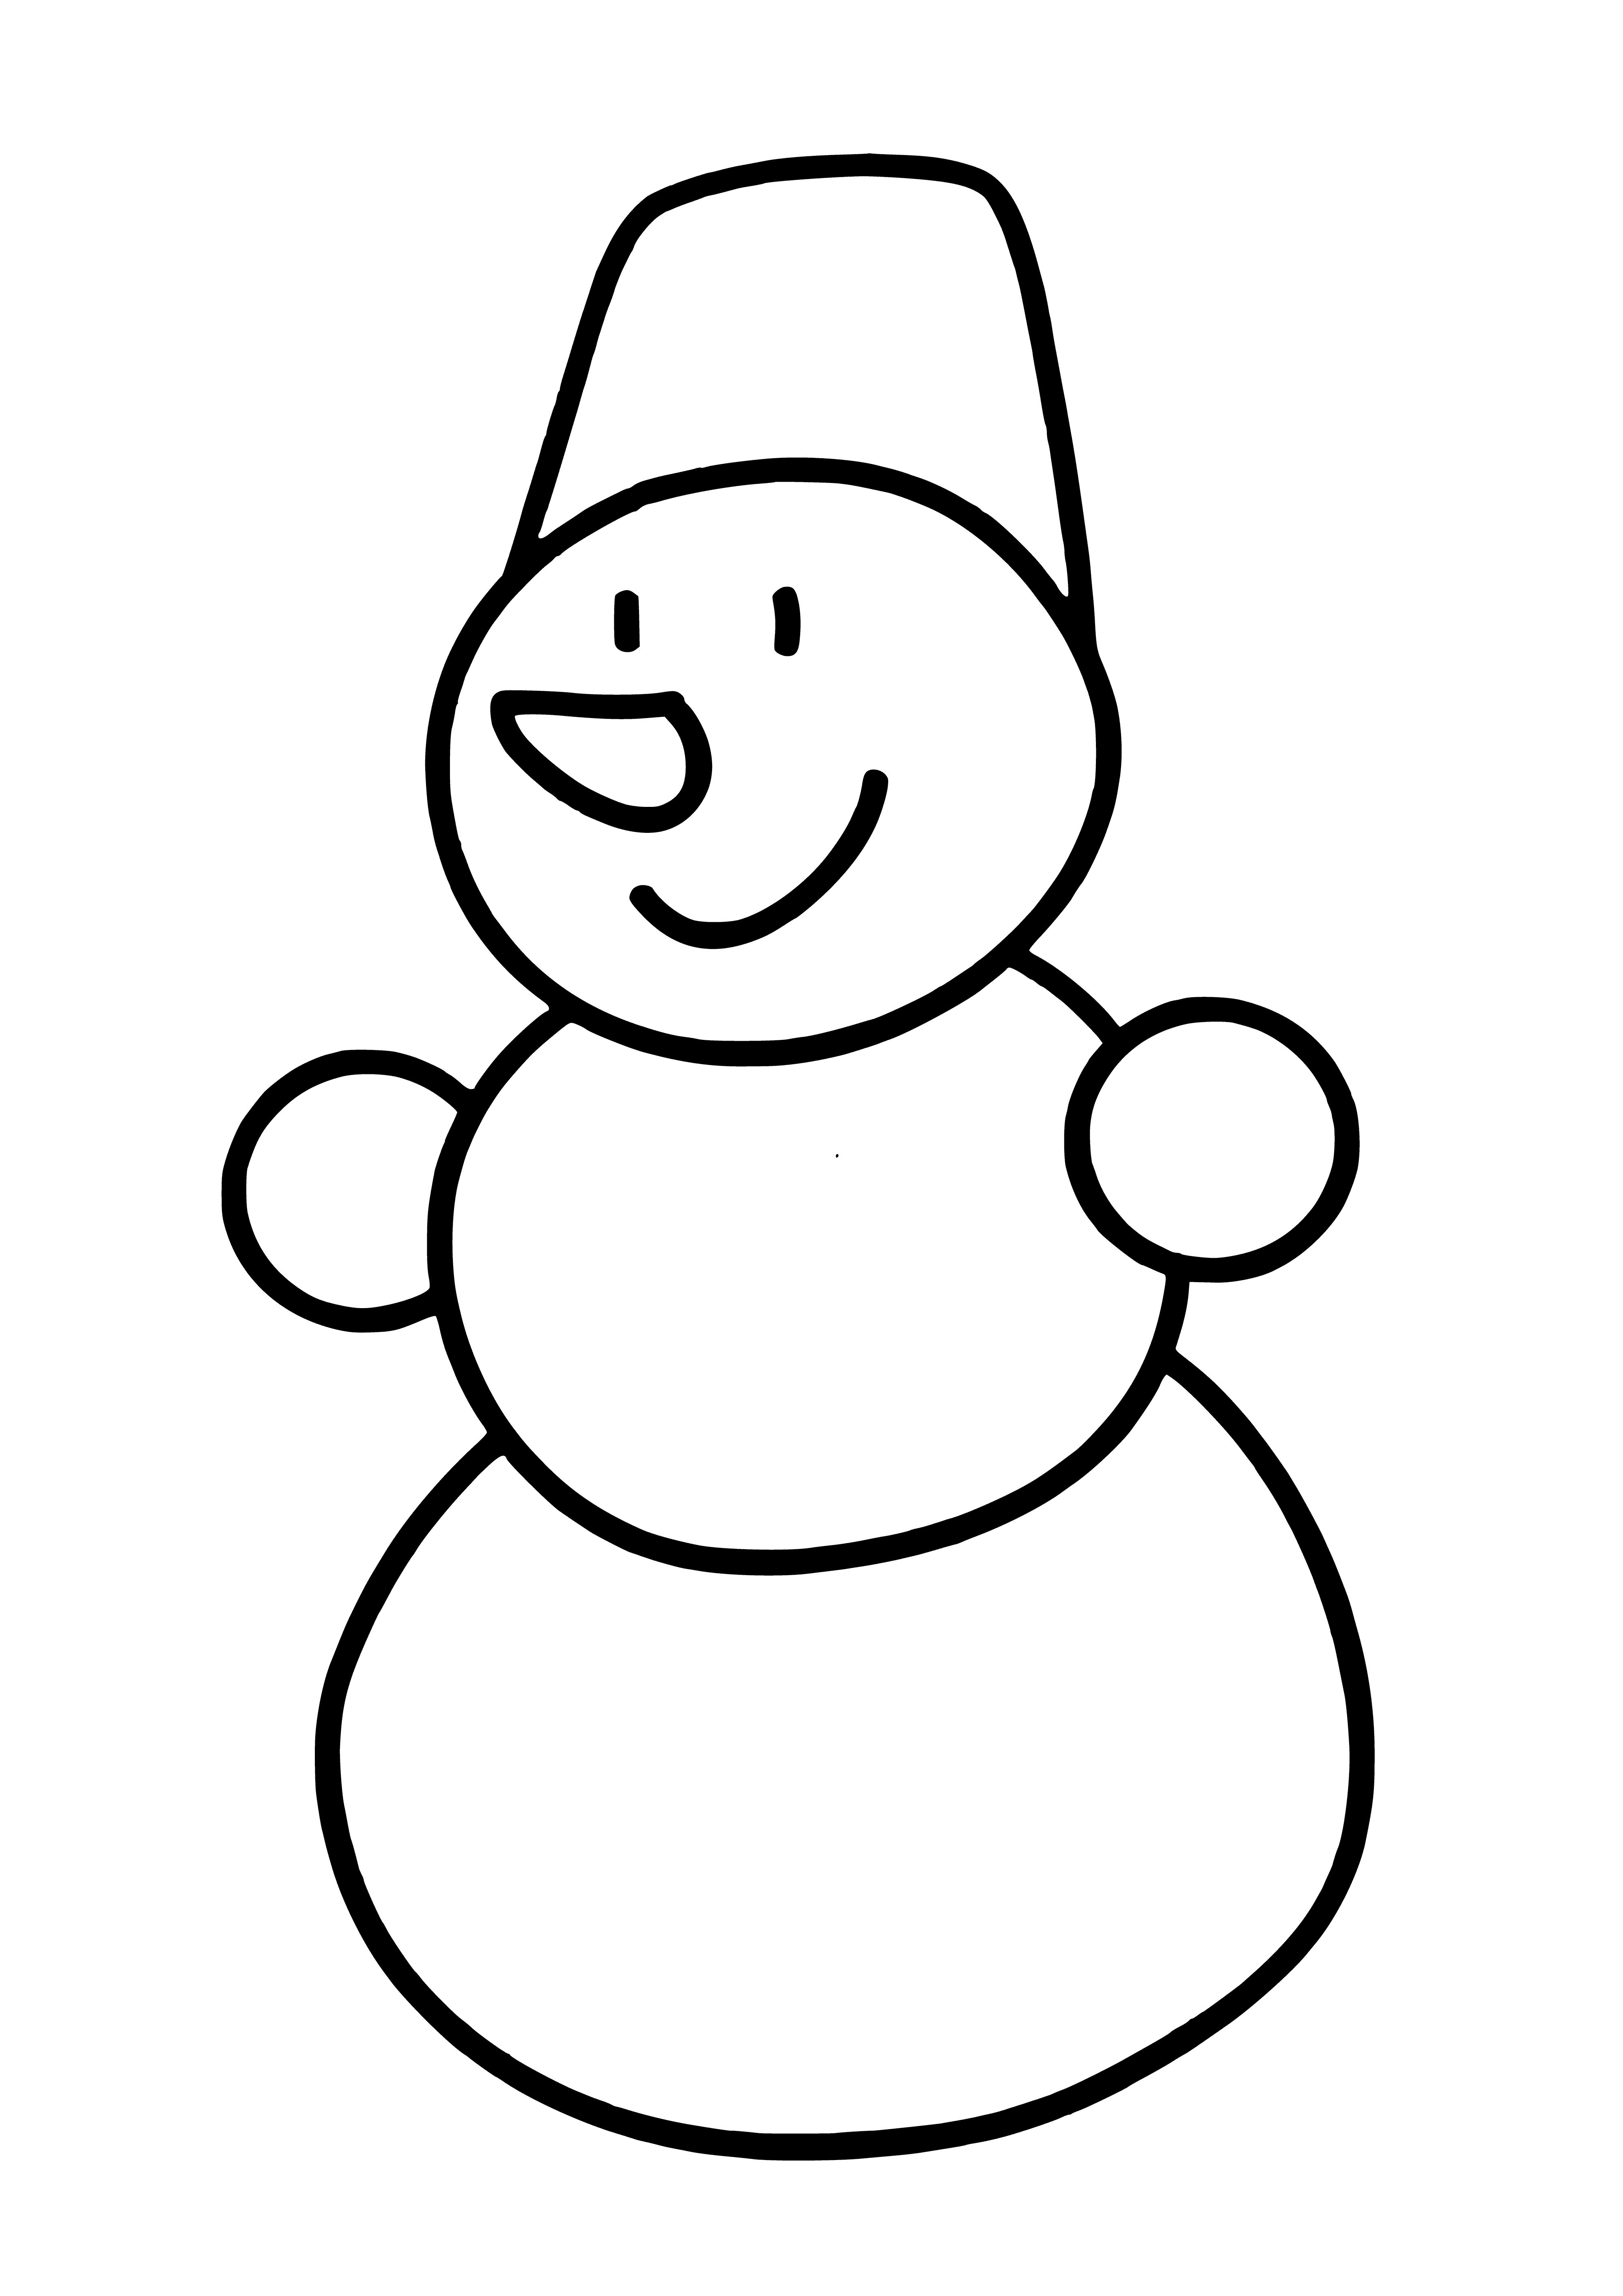 coloring page: A happy snowman with a carrot nose, black top hat, red scarf & outstretched arms smiling at us.